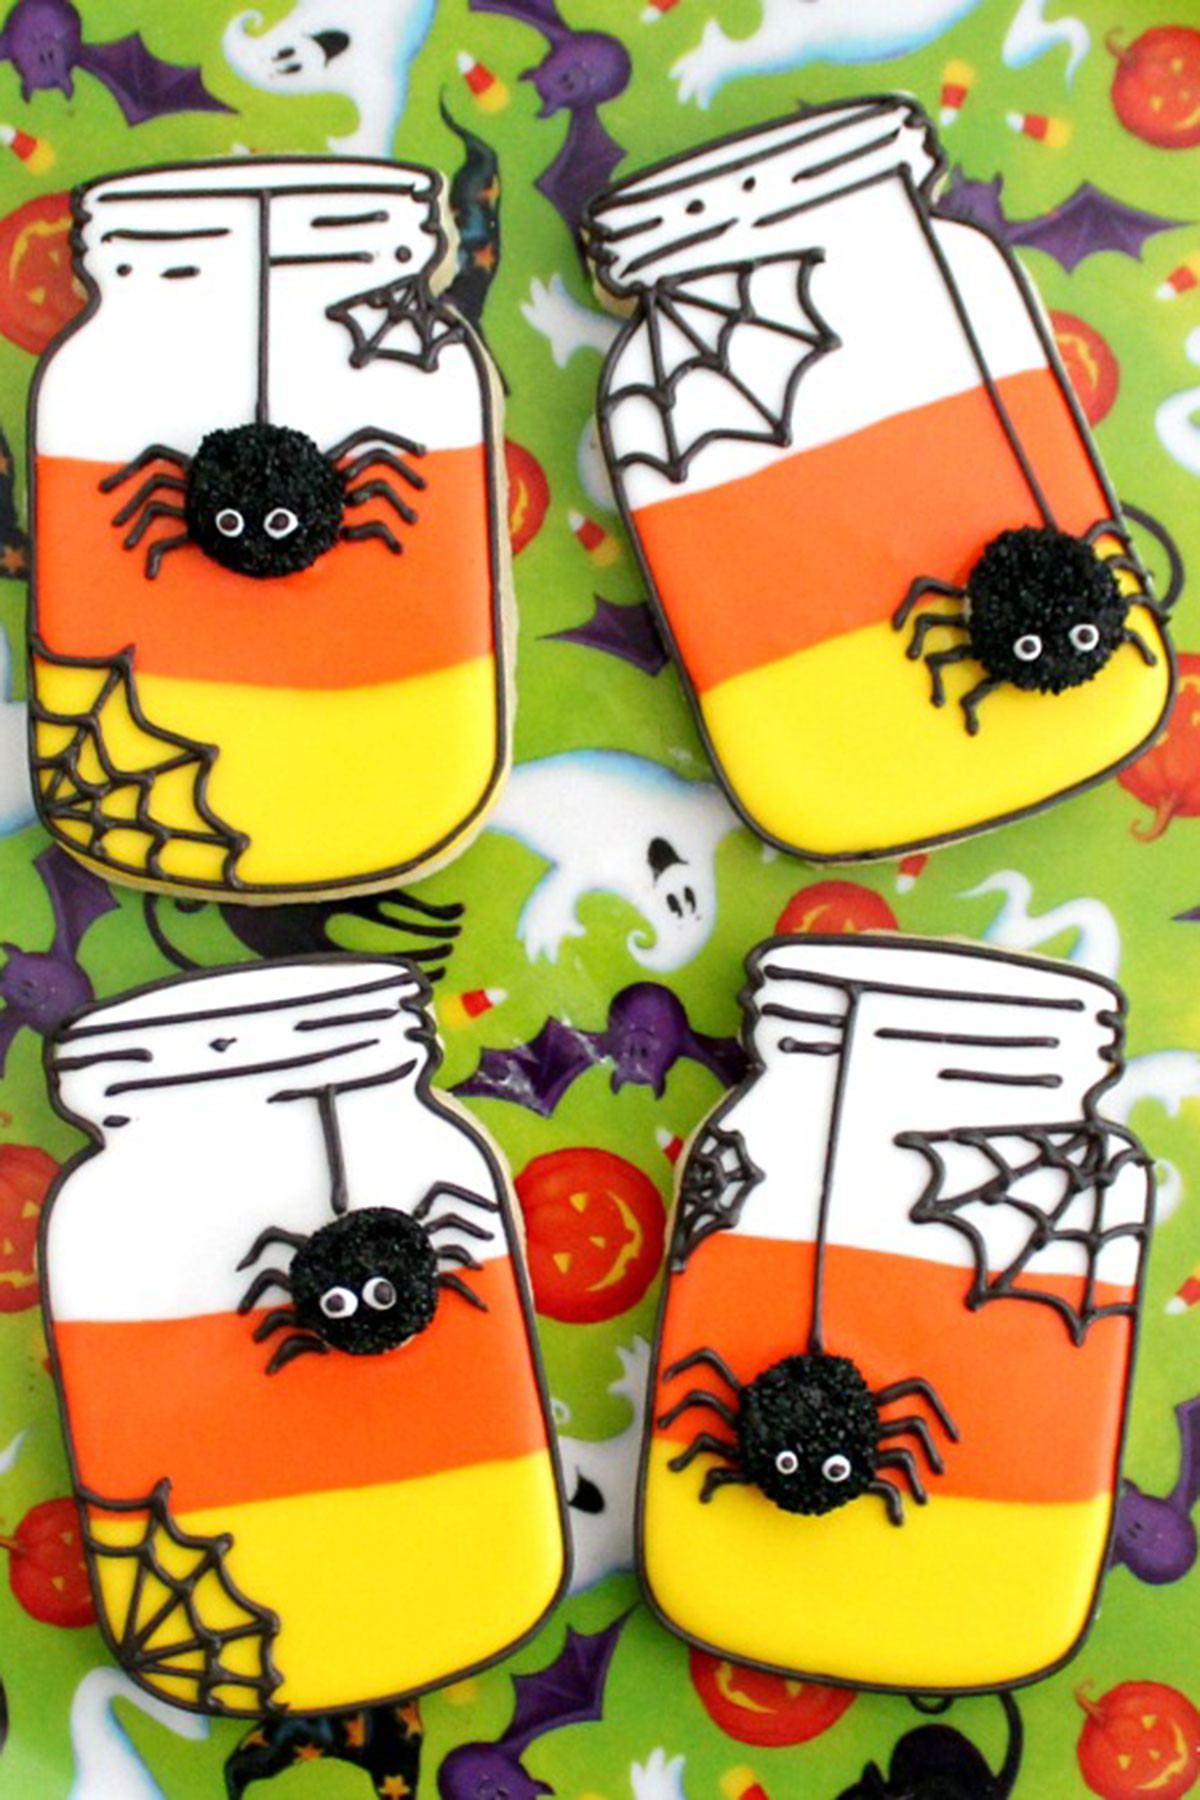 Pictures Of Halloween Cookies
 31 Easy Halloween Cookies Recipes & Ideas for Cute